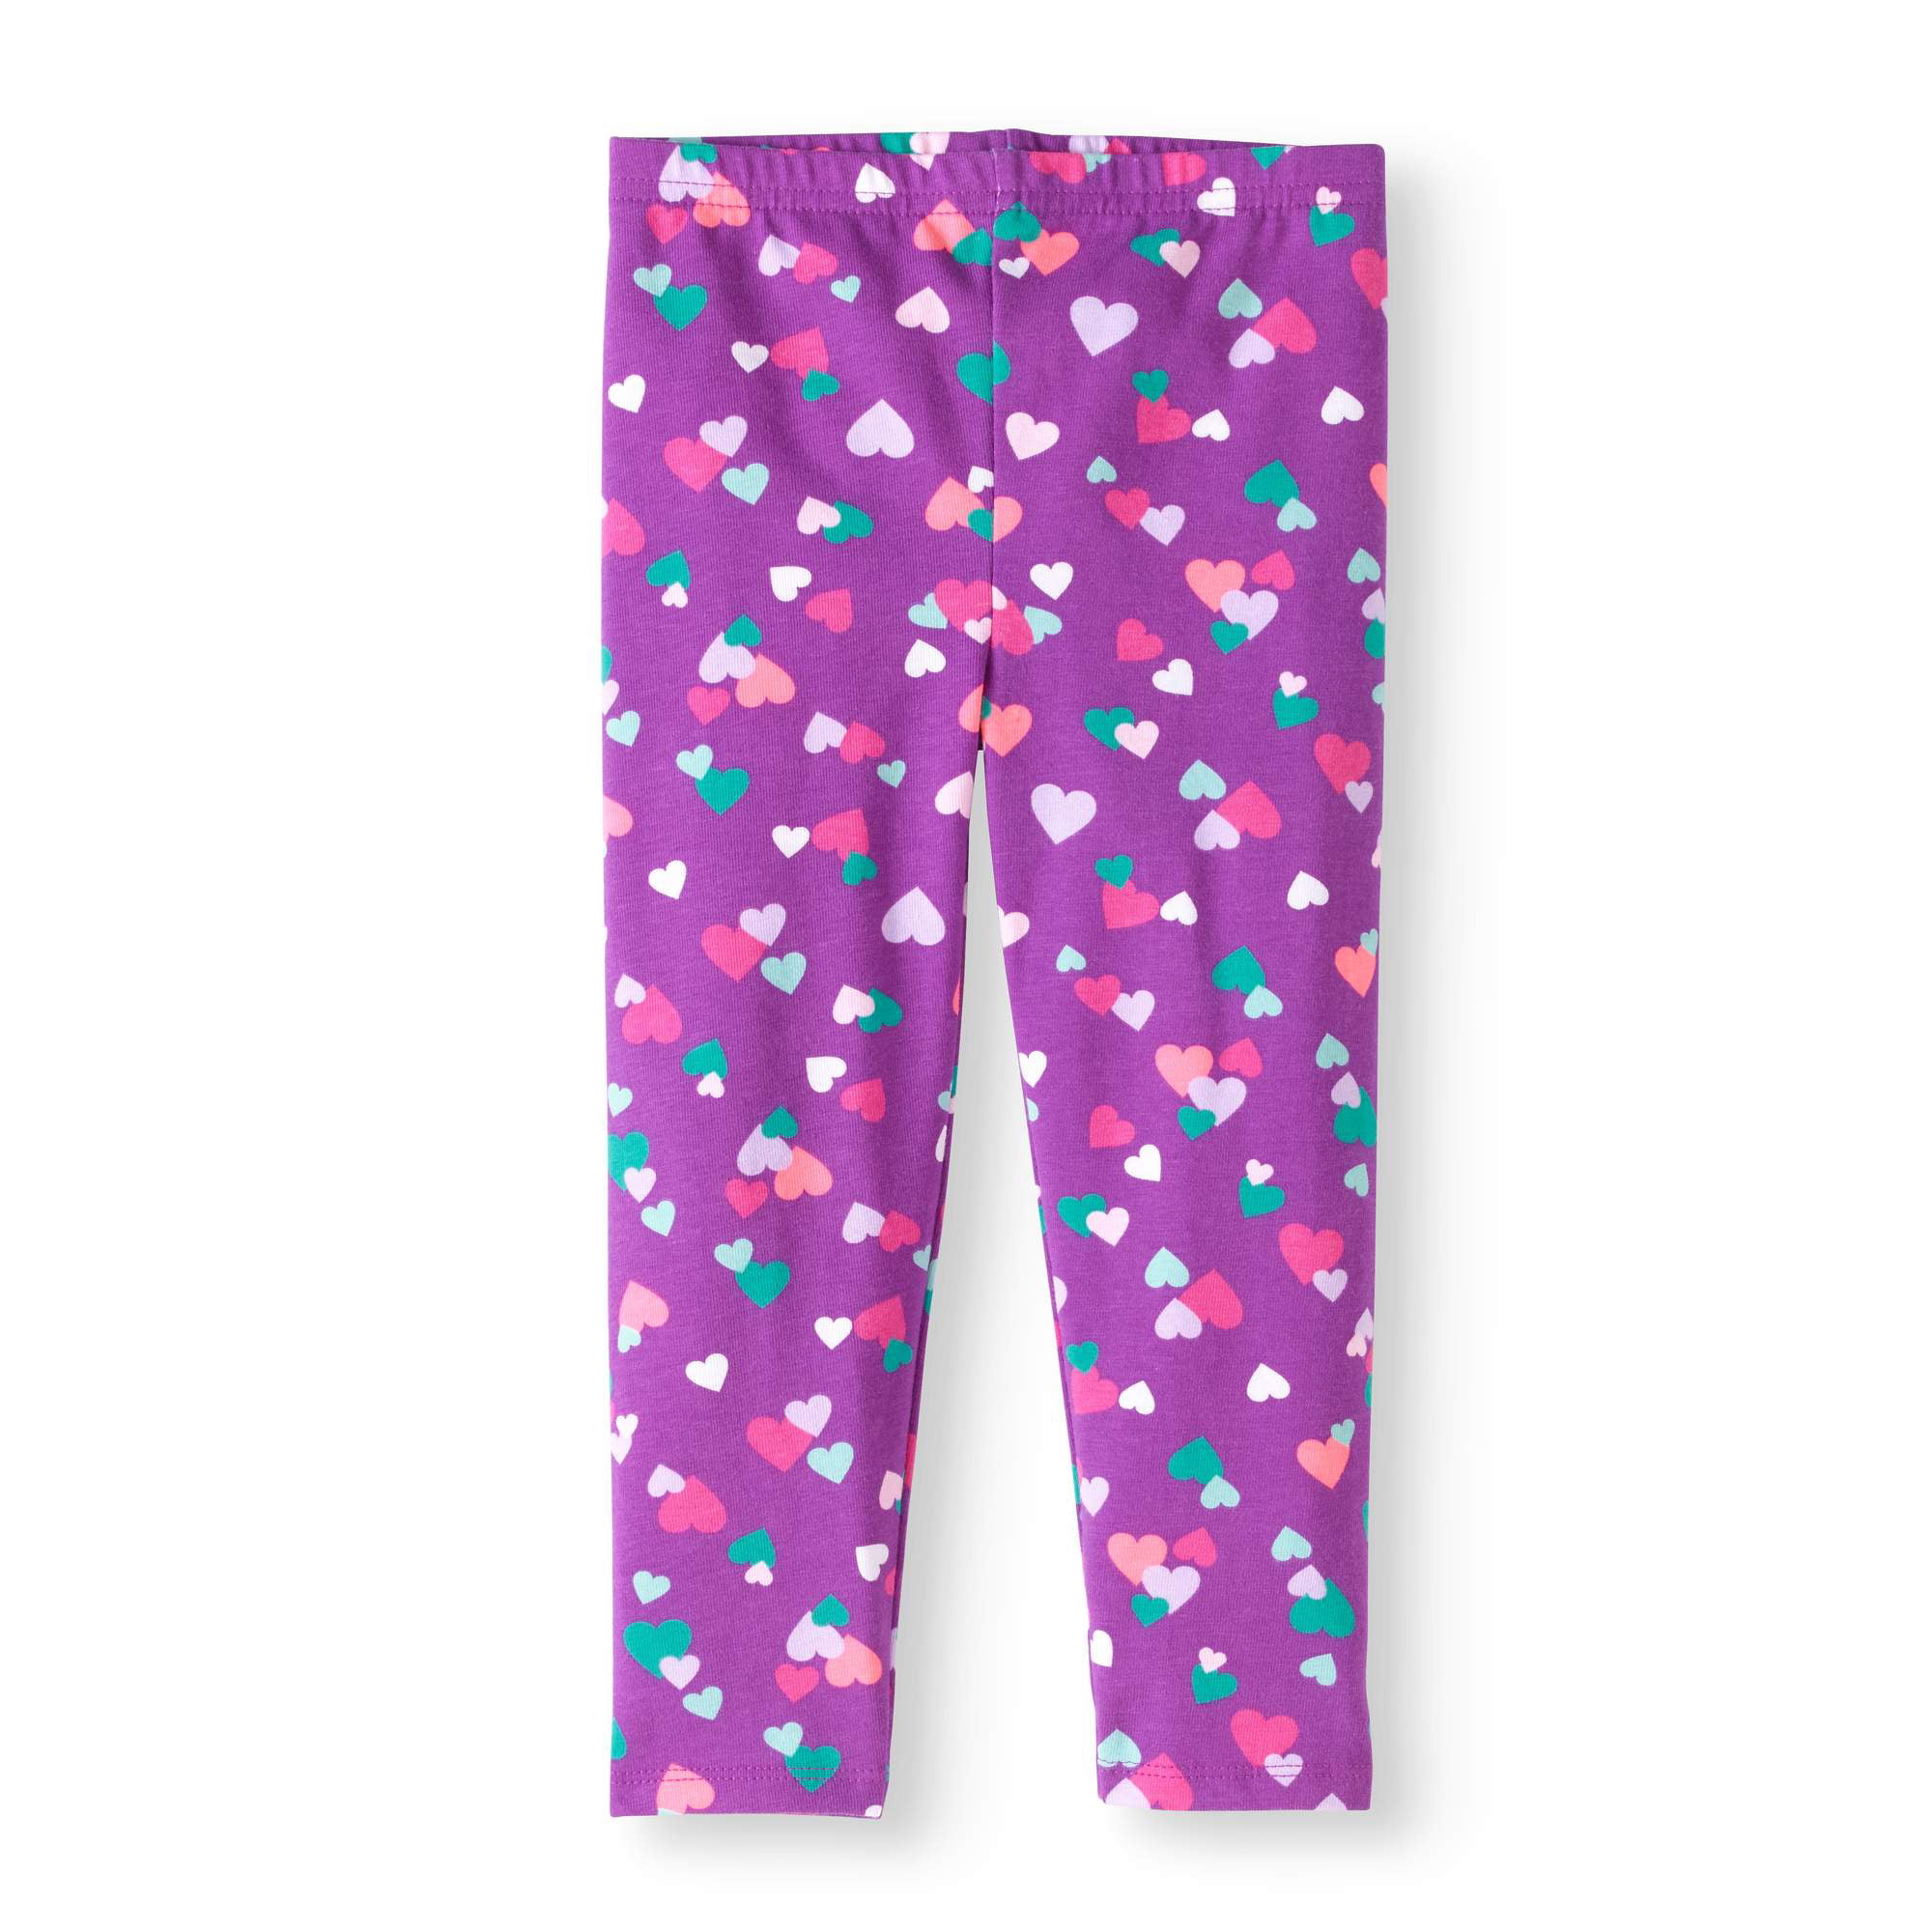 TODDLER'S LEGGINGS G ARANIMALS COTTON & SPANDEX BRAND NEW WITH TAGS PURPLE PRINT 